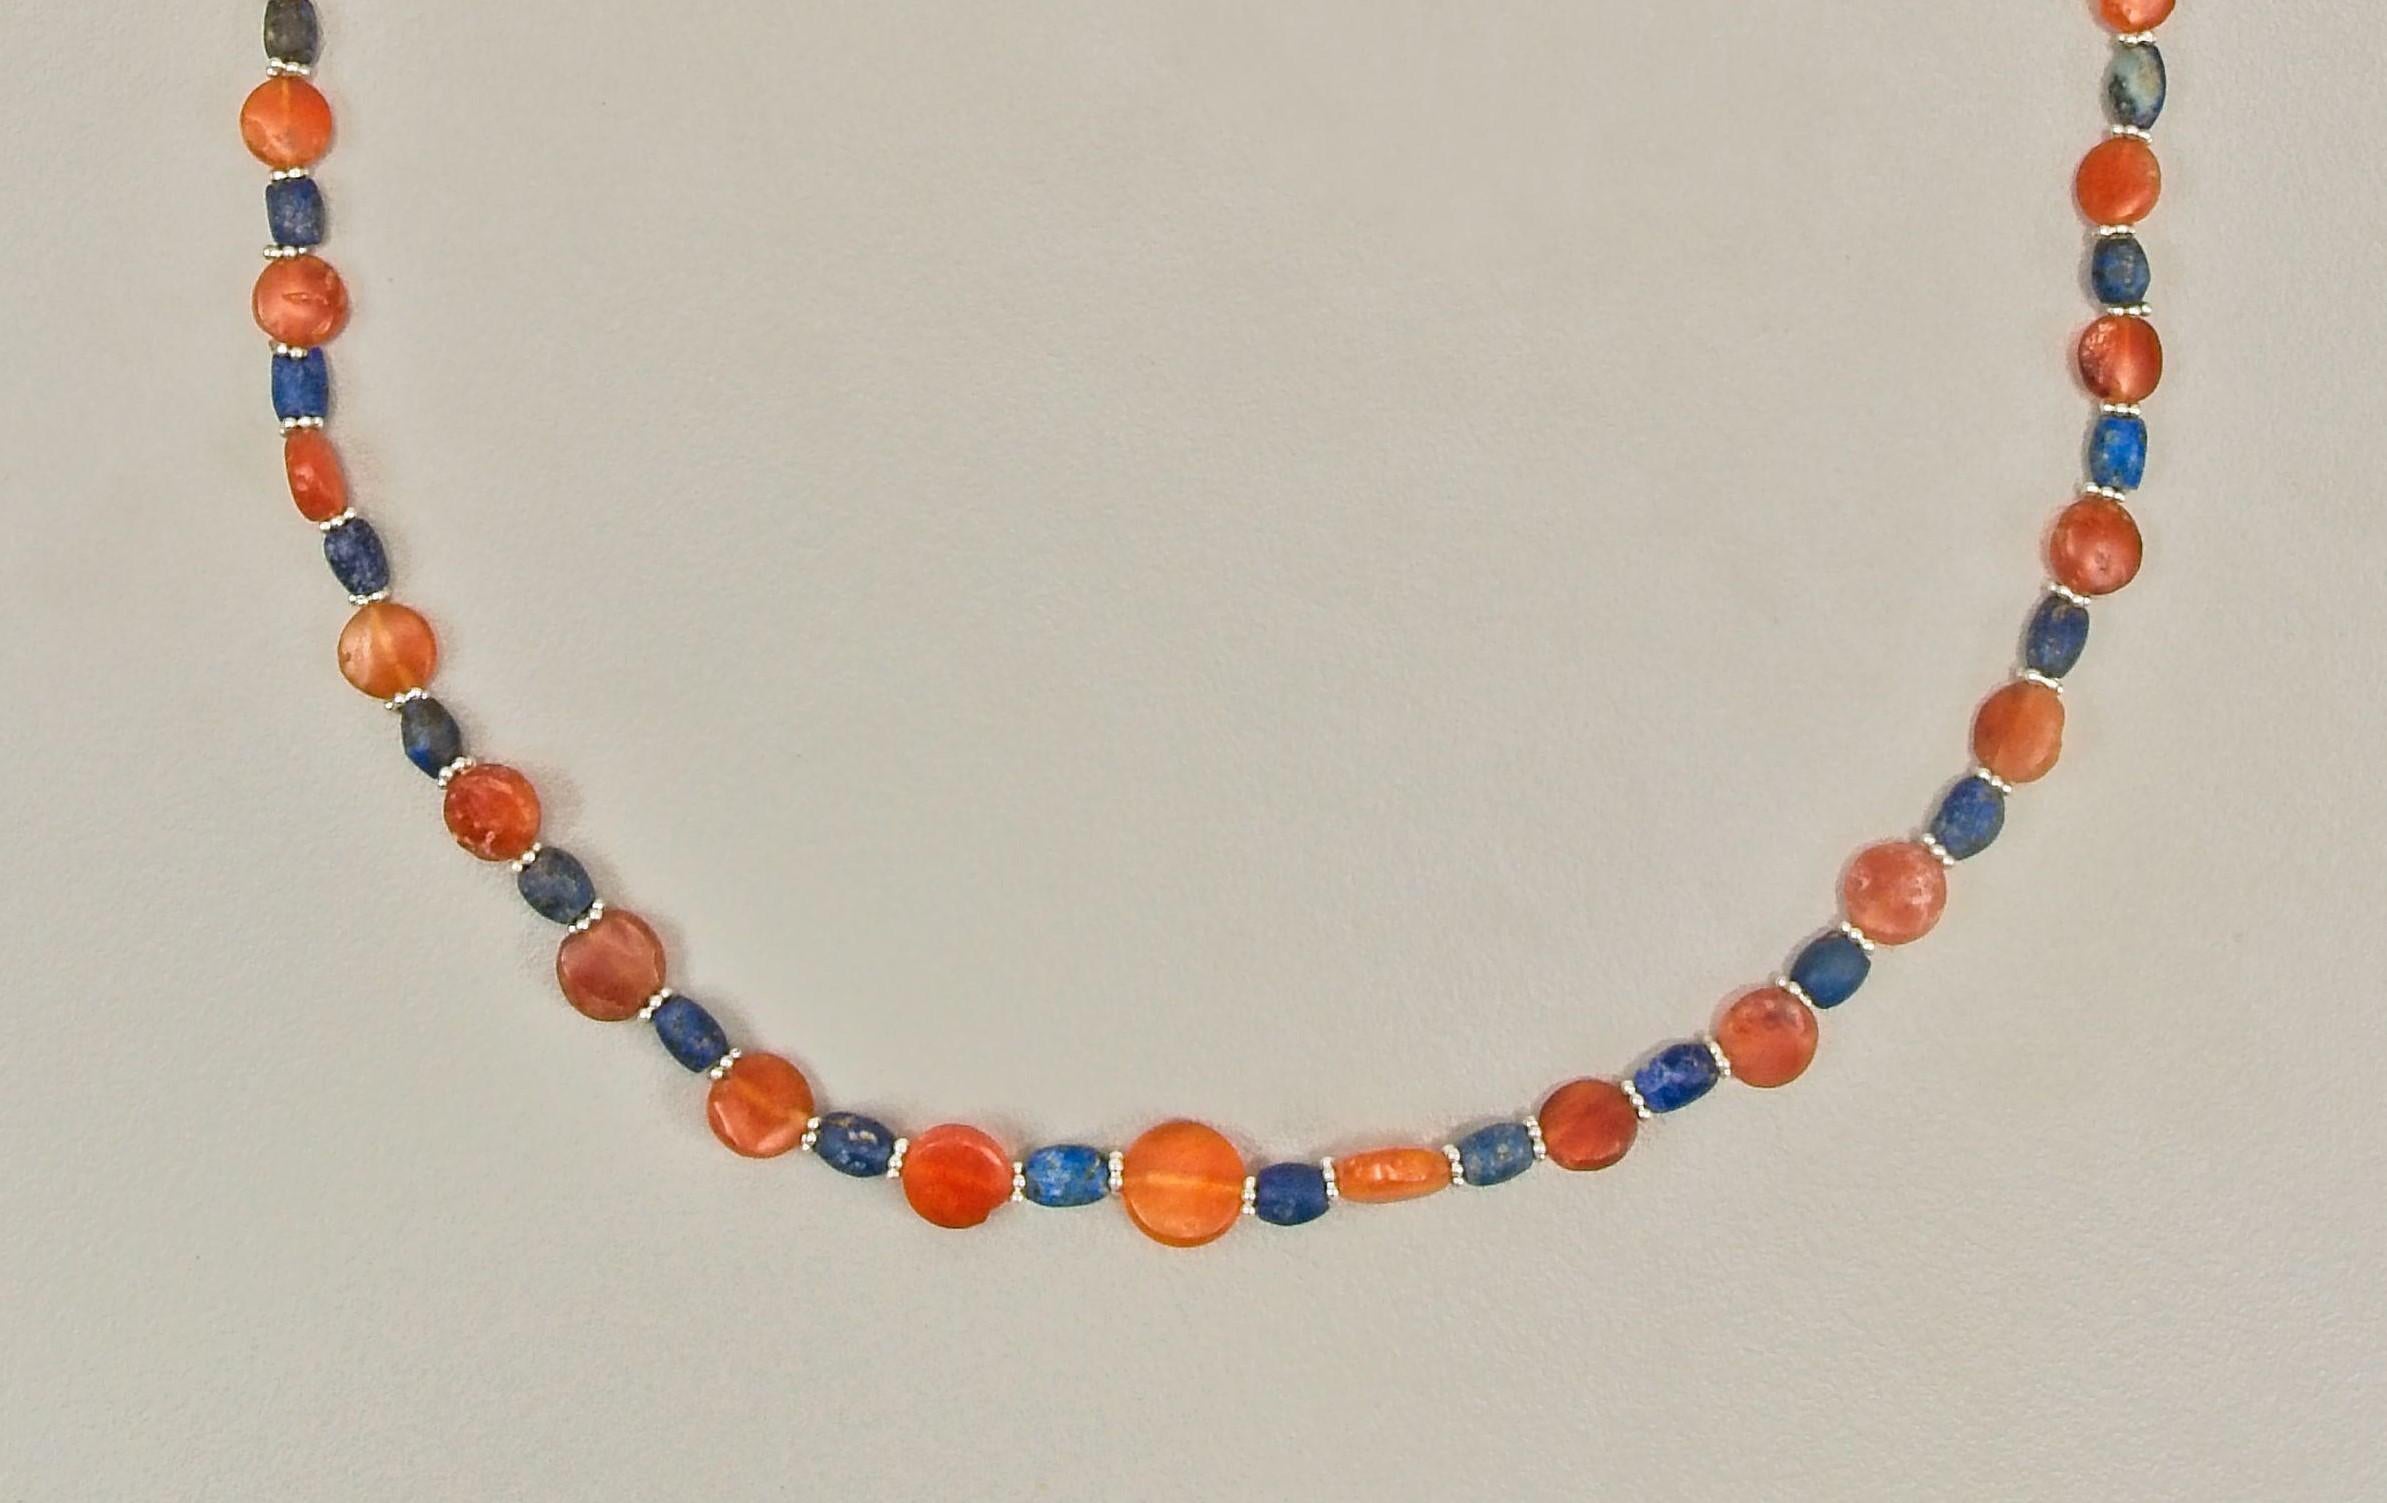 Thirty-one tabular carnelian beads alternating with thirty-two barrel shaped lapis lazuli beads. There are sixty-two silver ring beads in the necklace; they occupy the spaces between each of the stones beads. Each is composed of five granules fused